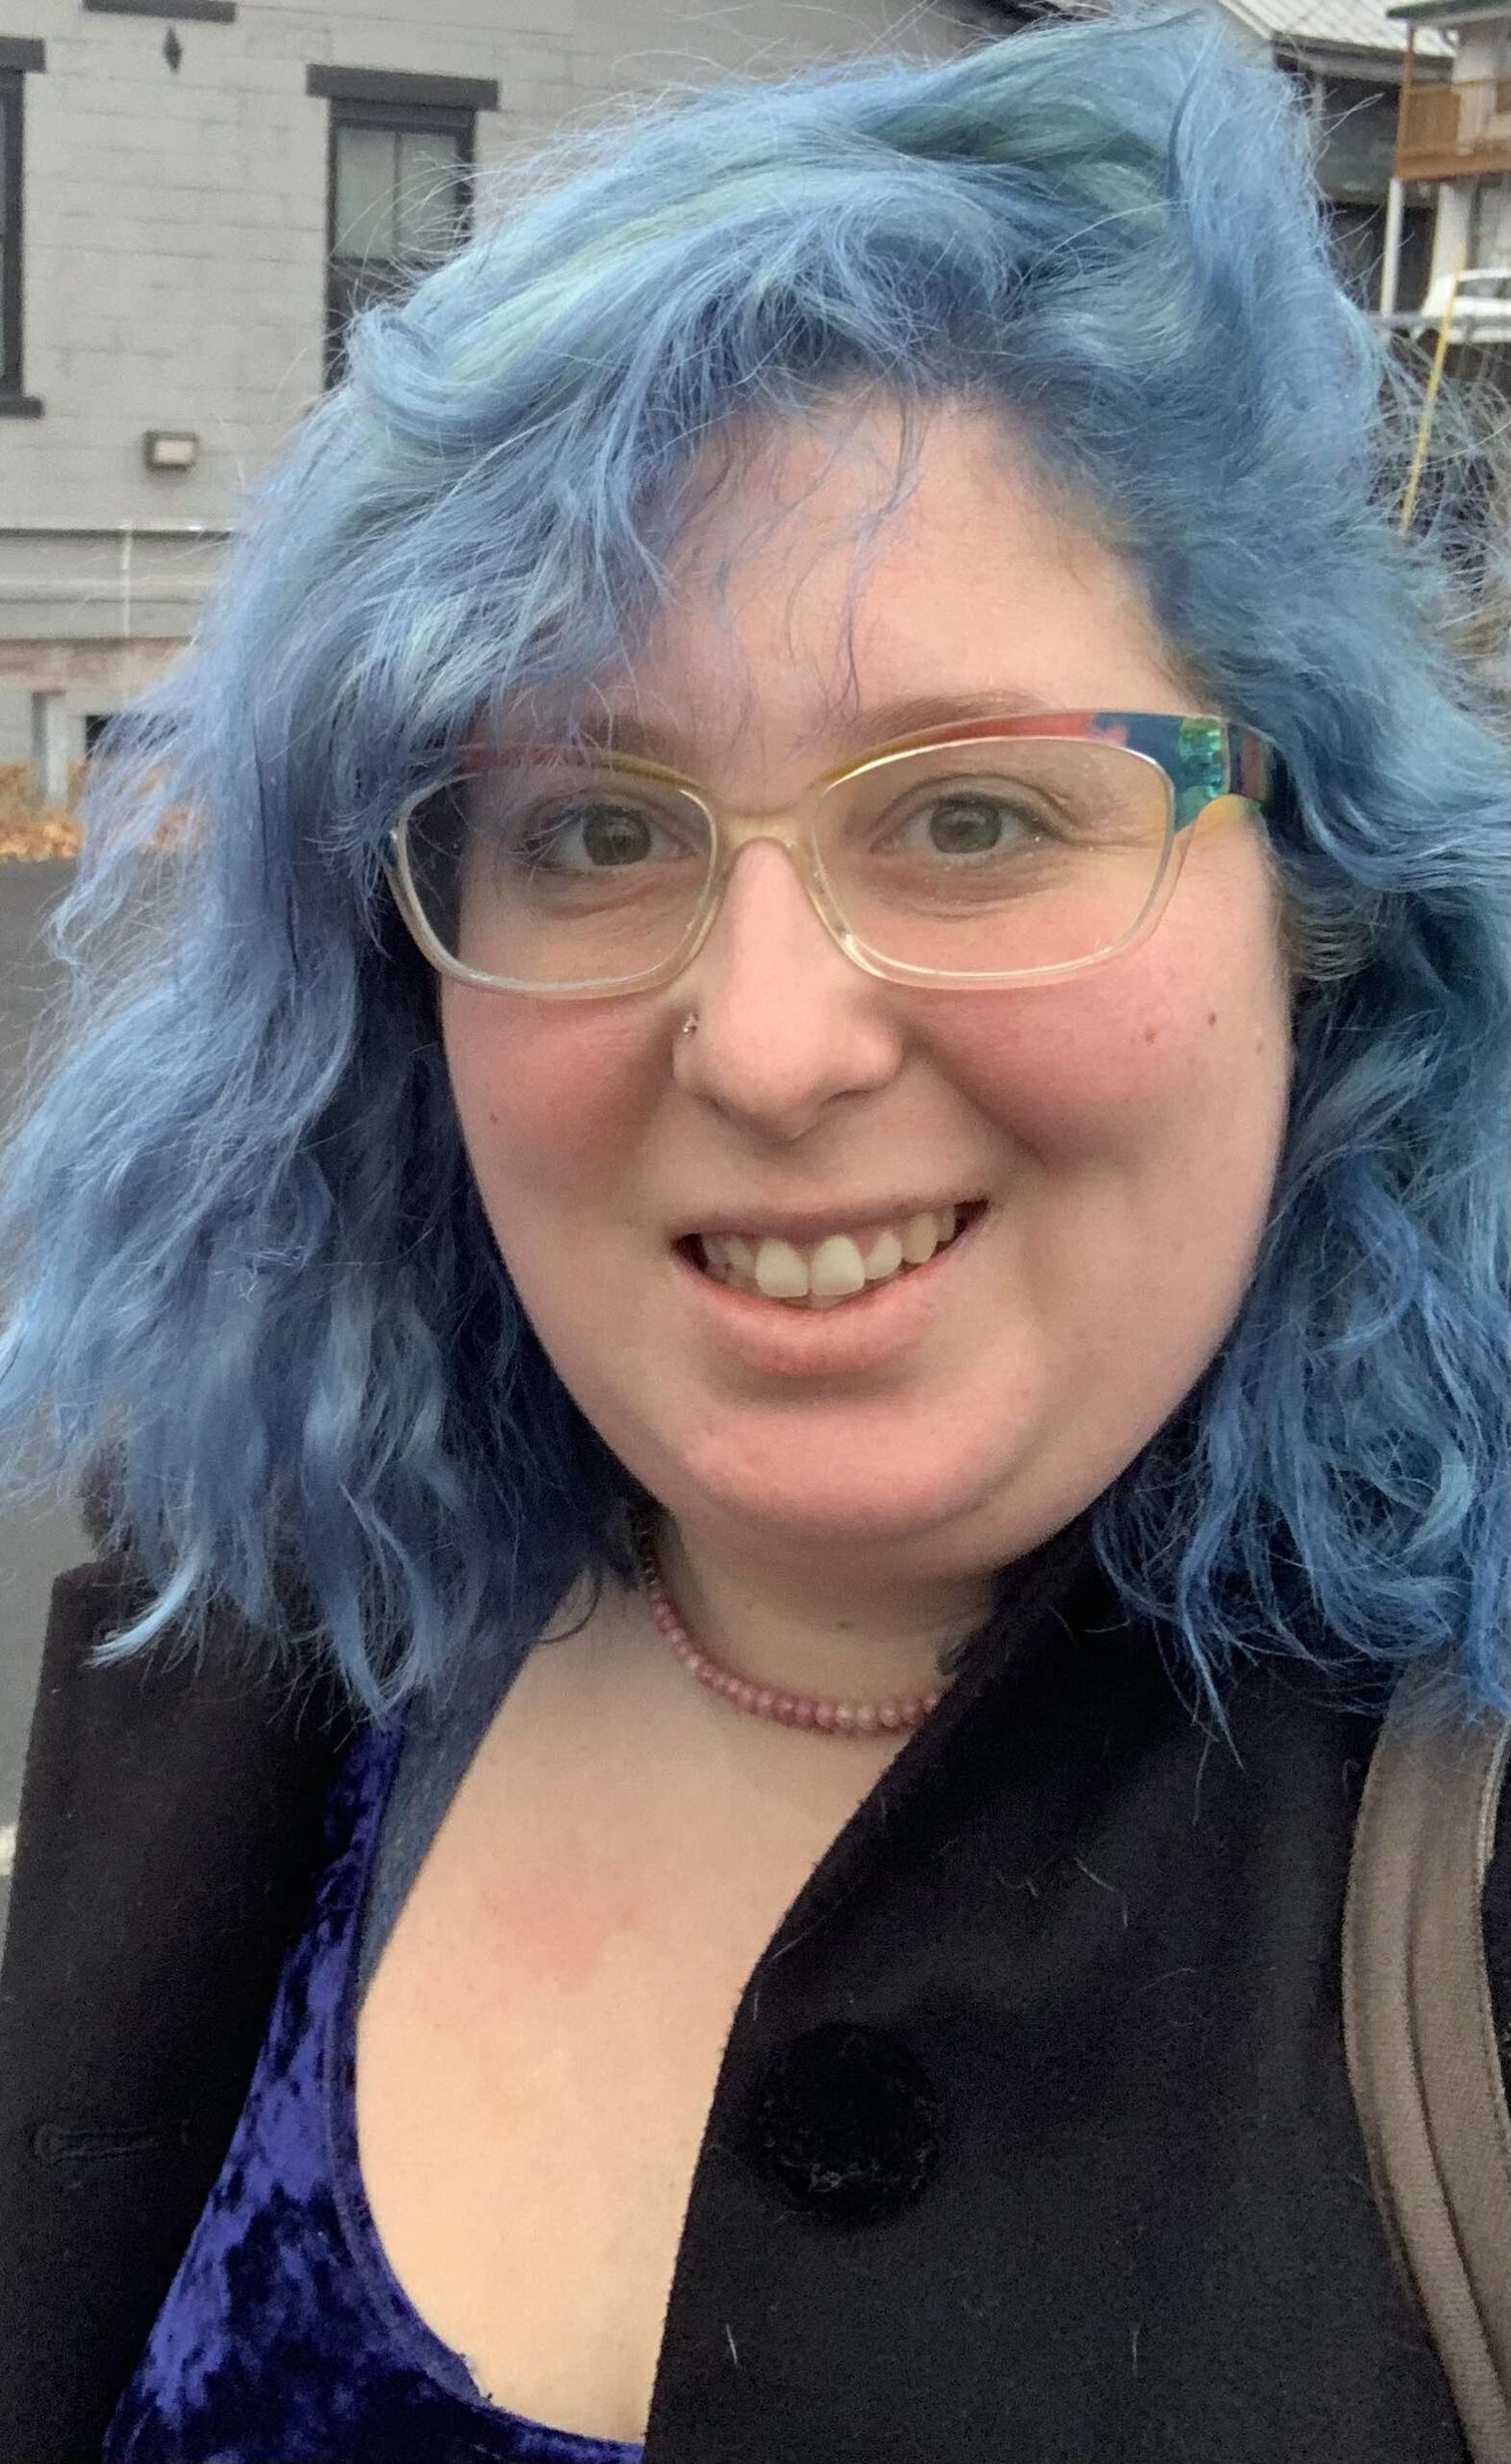 Jennifer Lupu, outdoors in an urban location, glasses with multicolor frame, smiling, hair dyed blue, purple velour top under black jacket, coral necklace